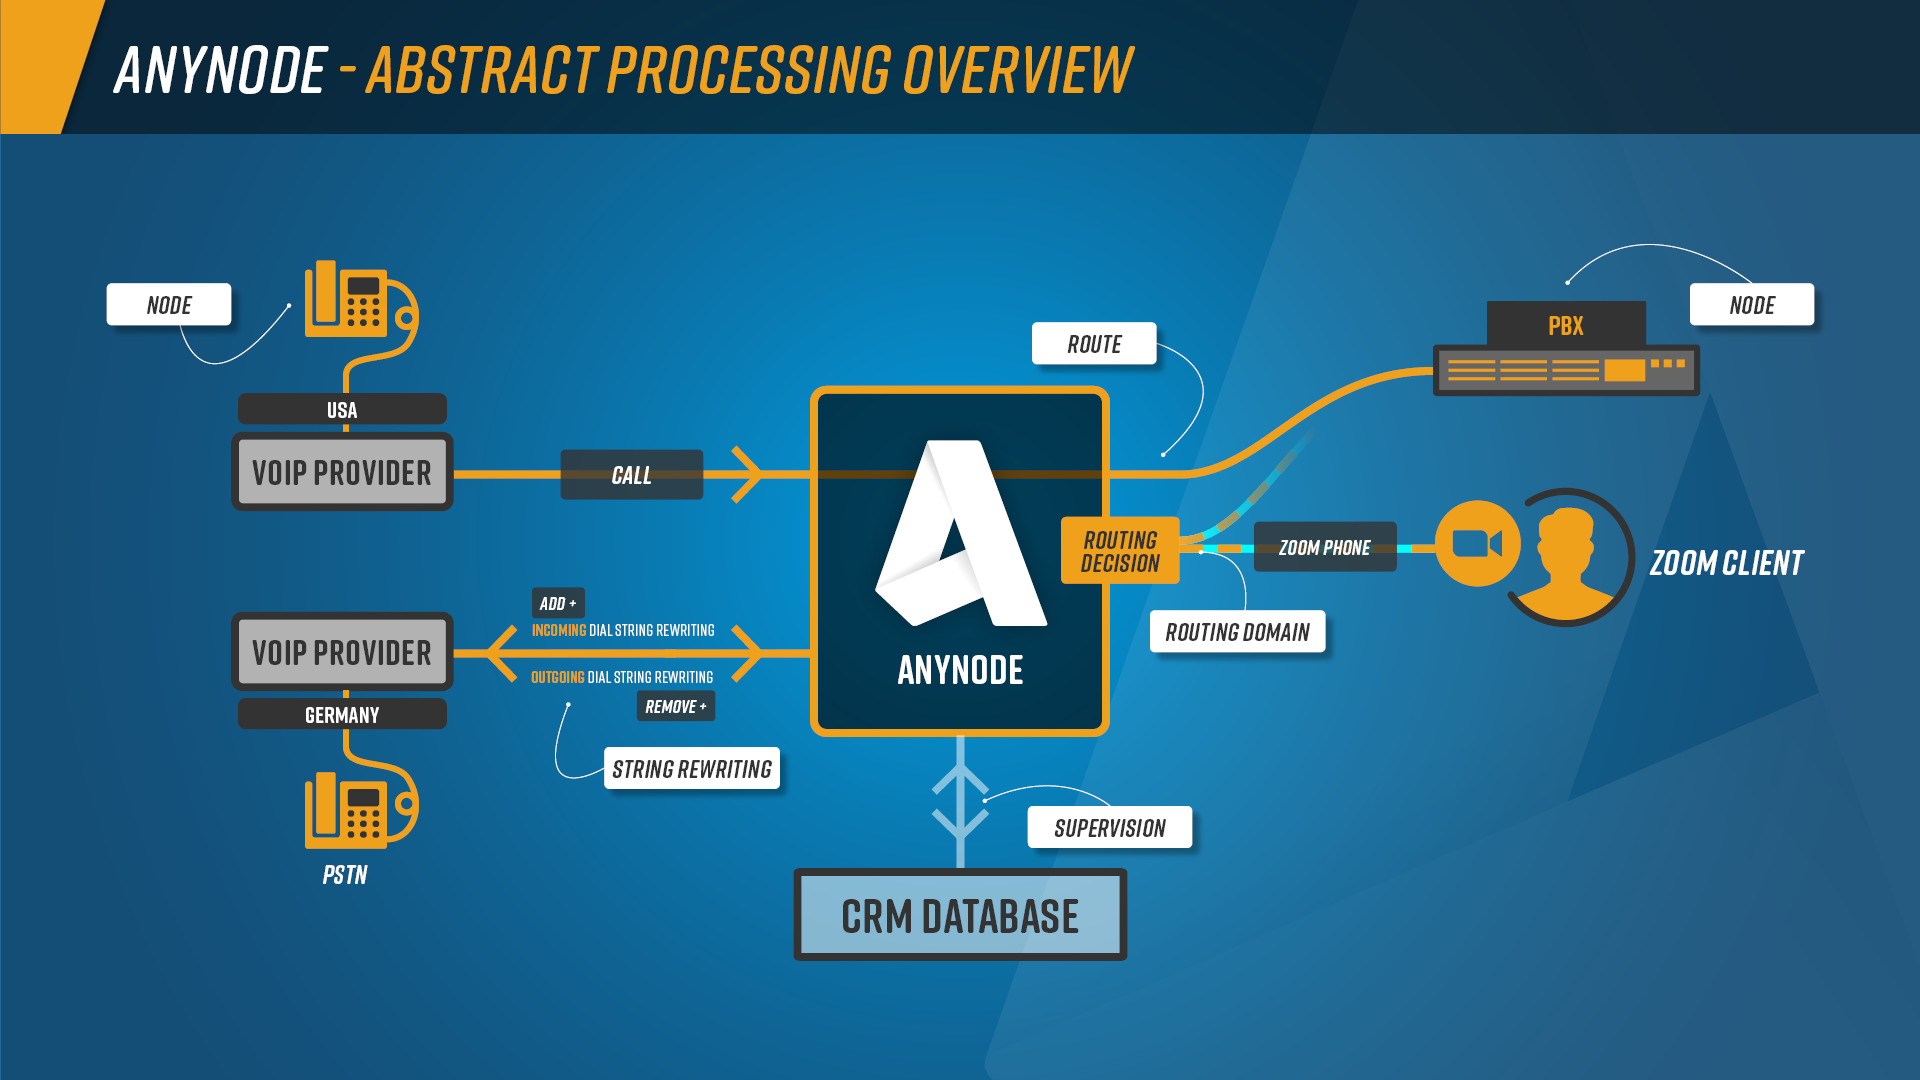 Infographic: Abstract processing overview of anynode – The Software SBC is built in a network with multiple routing domains, inbound SIP connections, in- and outgoing dial string rewriting rules, specific filters, and routing decisions.